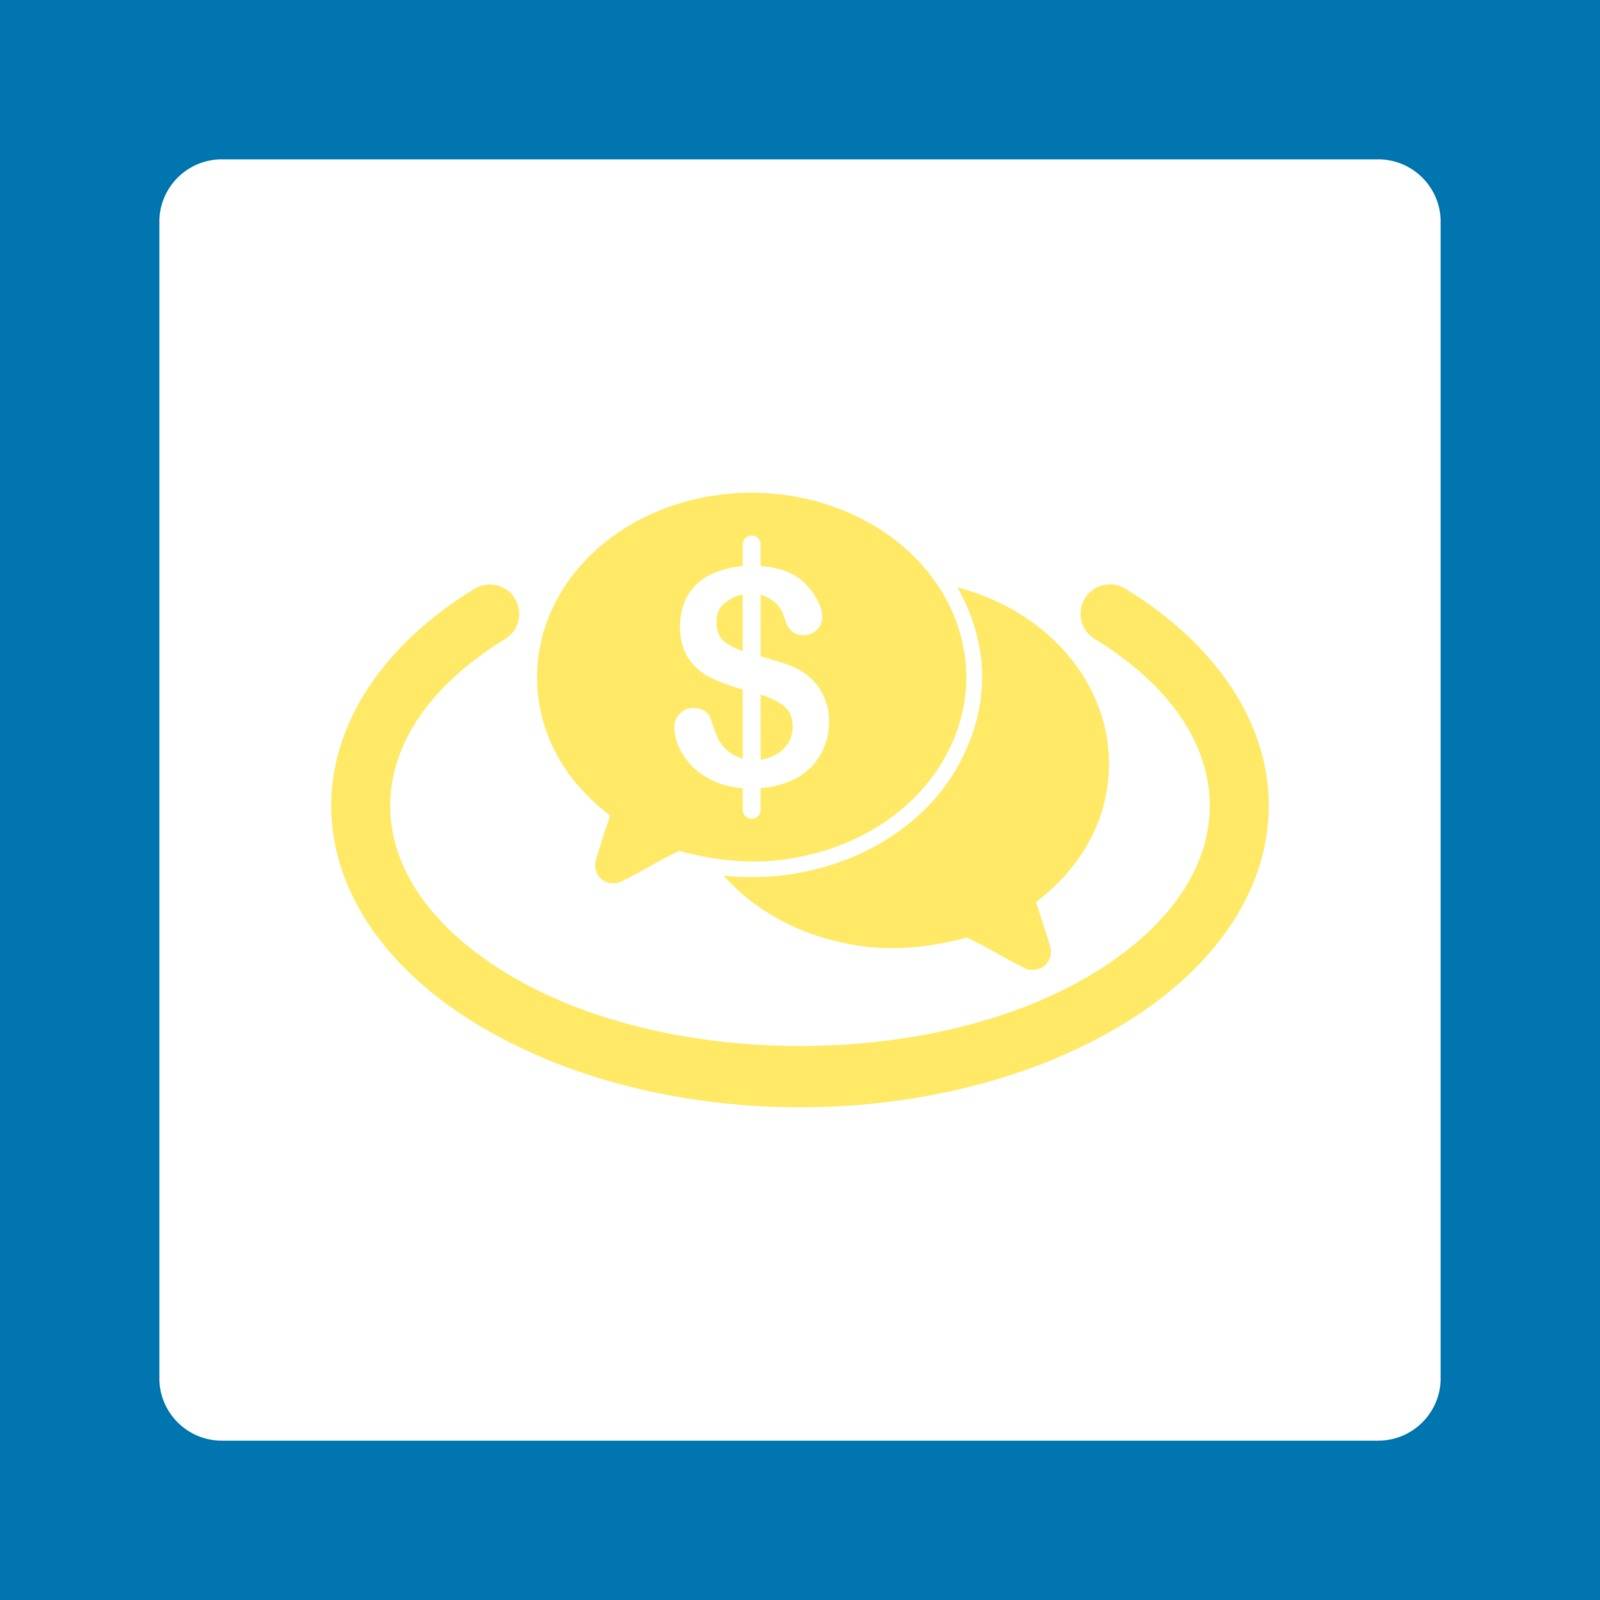 Financial Network icon by ahasoft